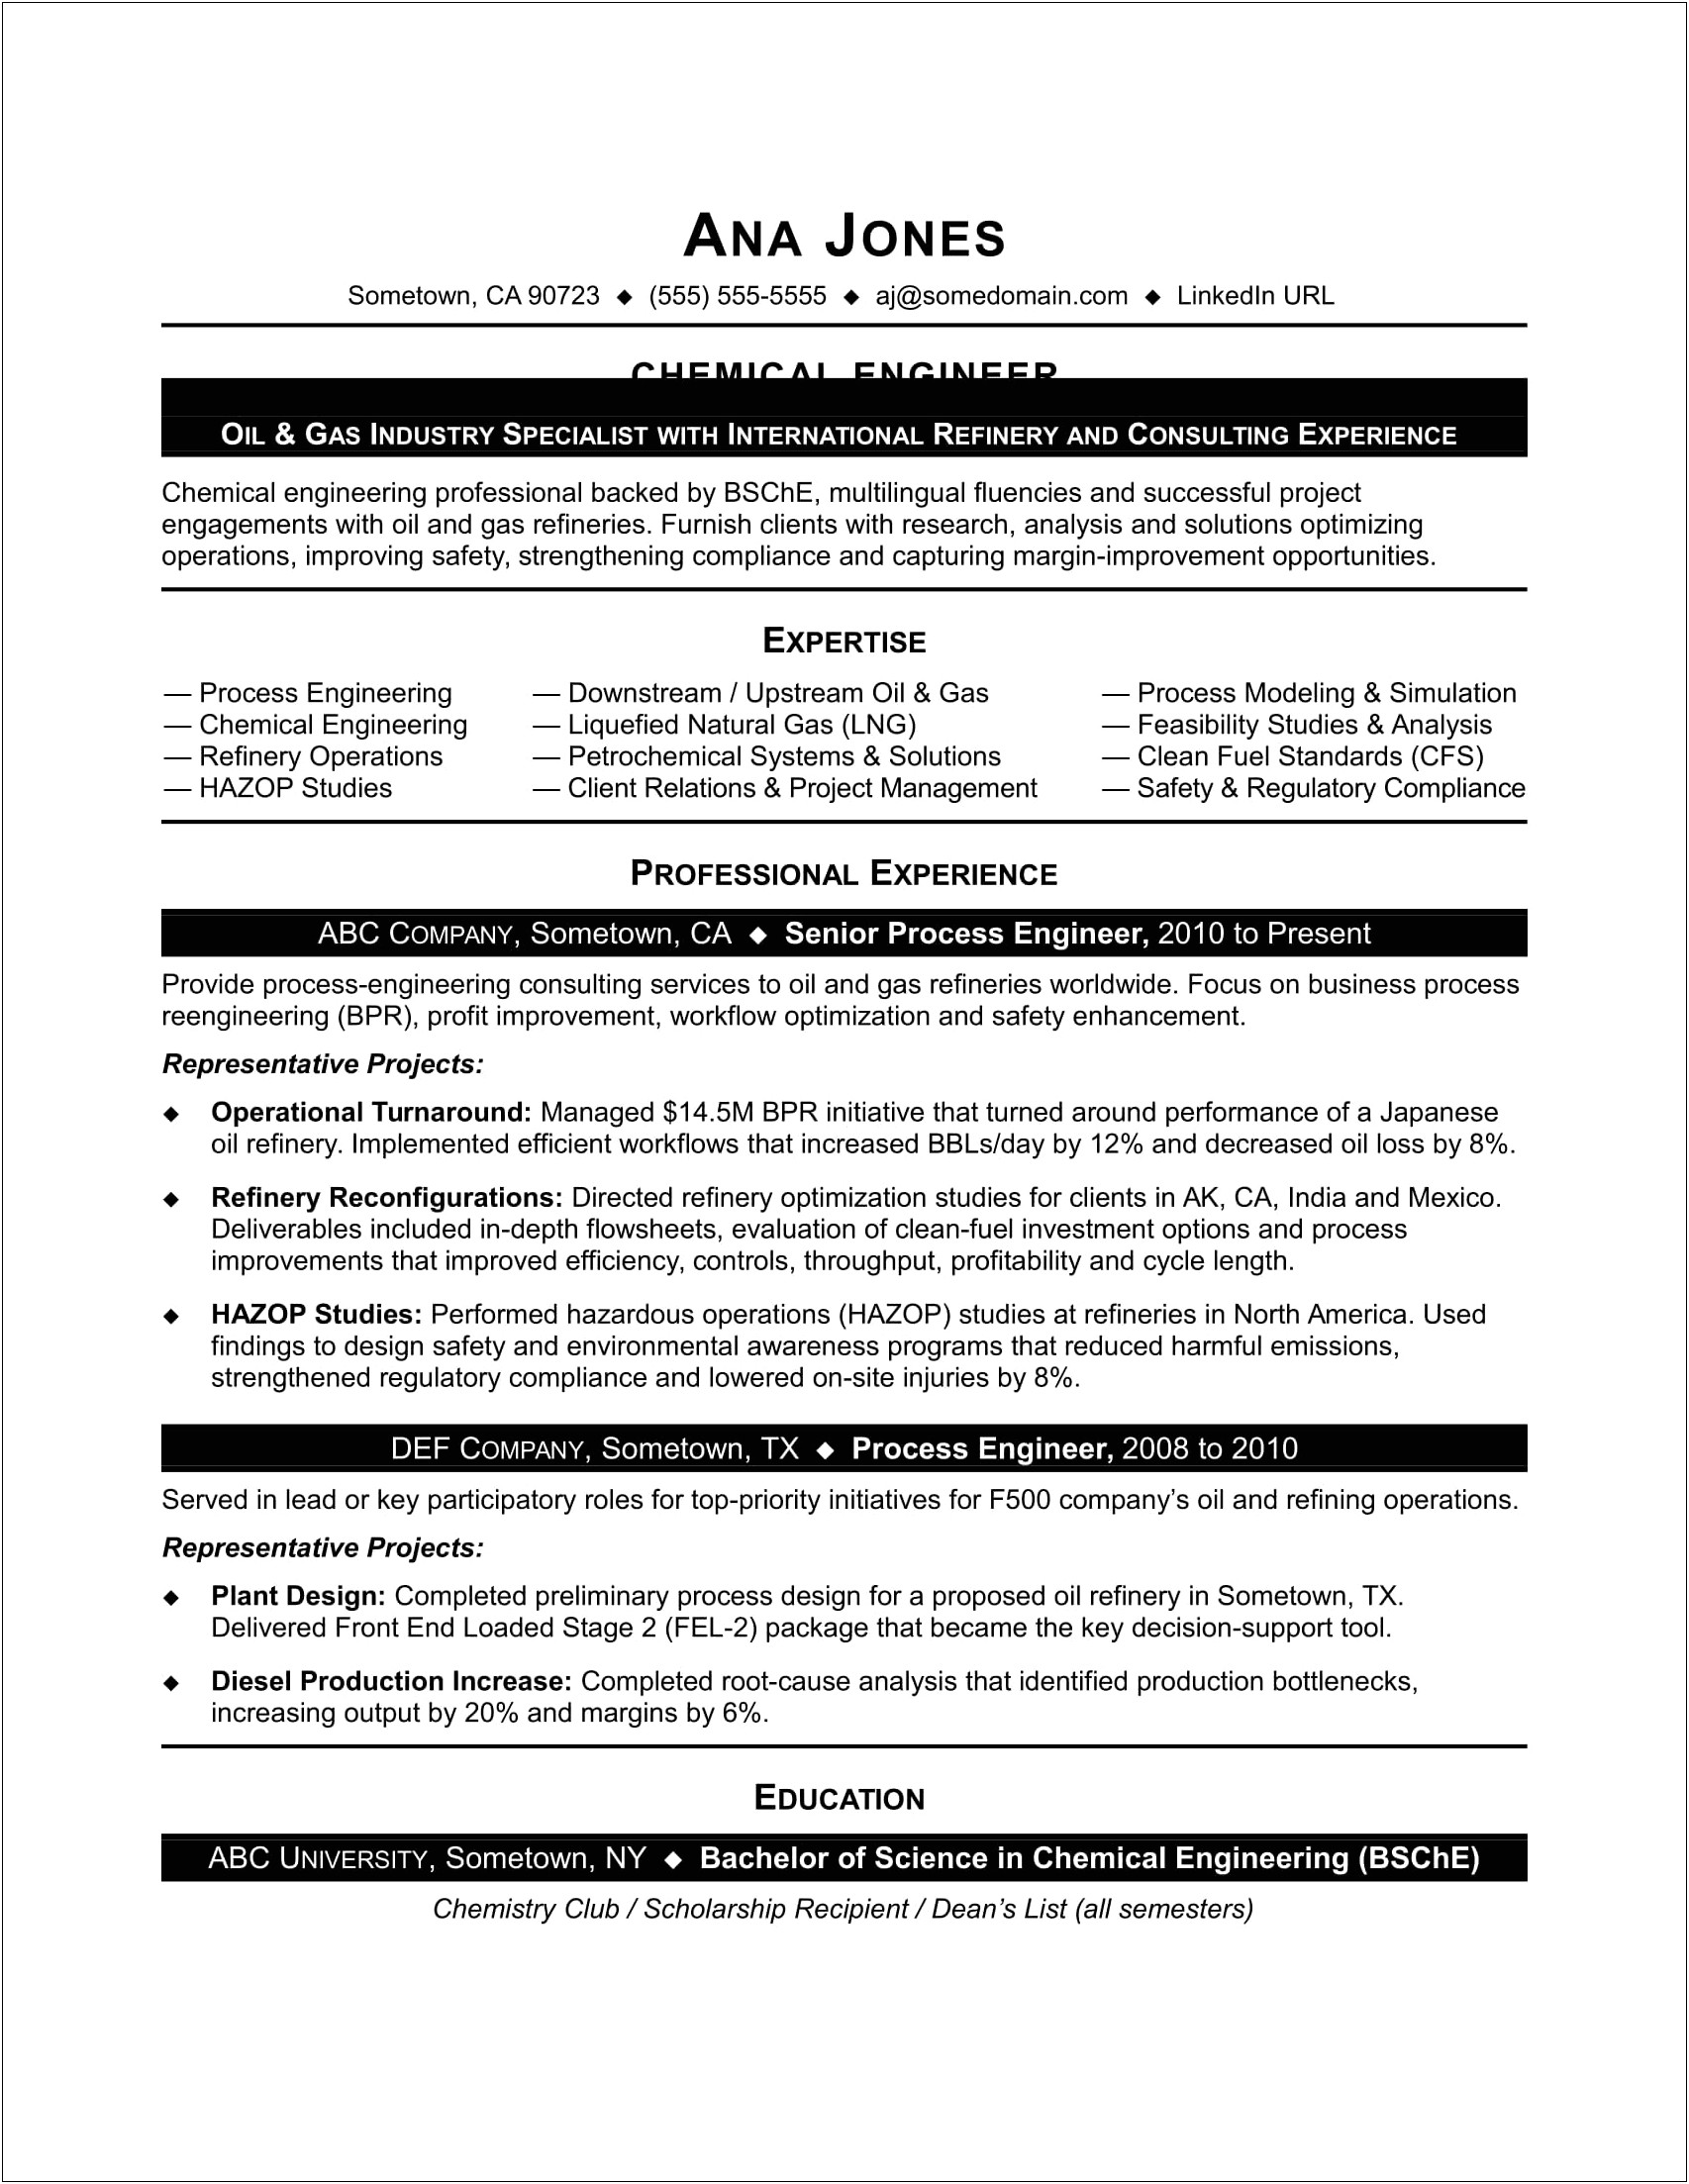 Resume Objective Examples For Oil Field